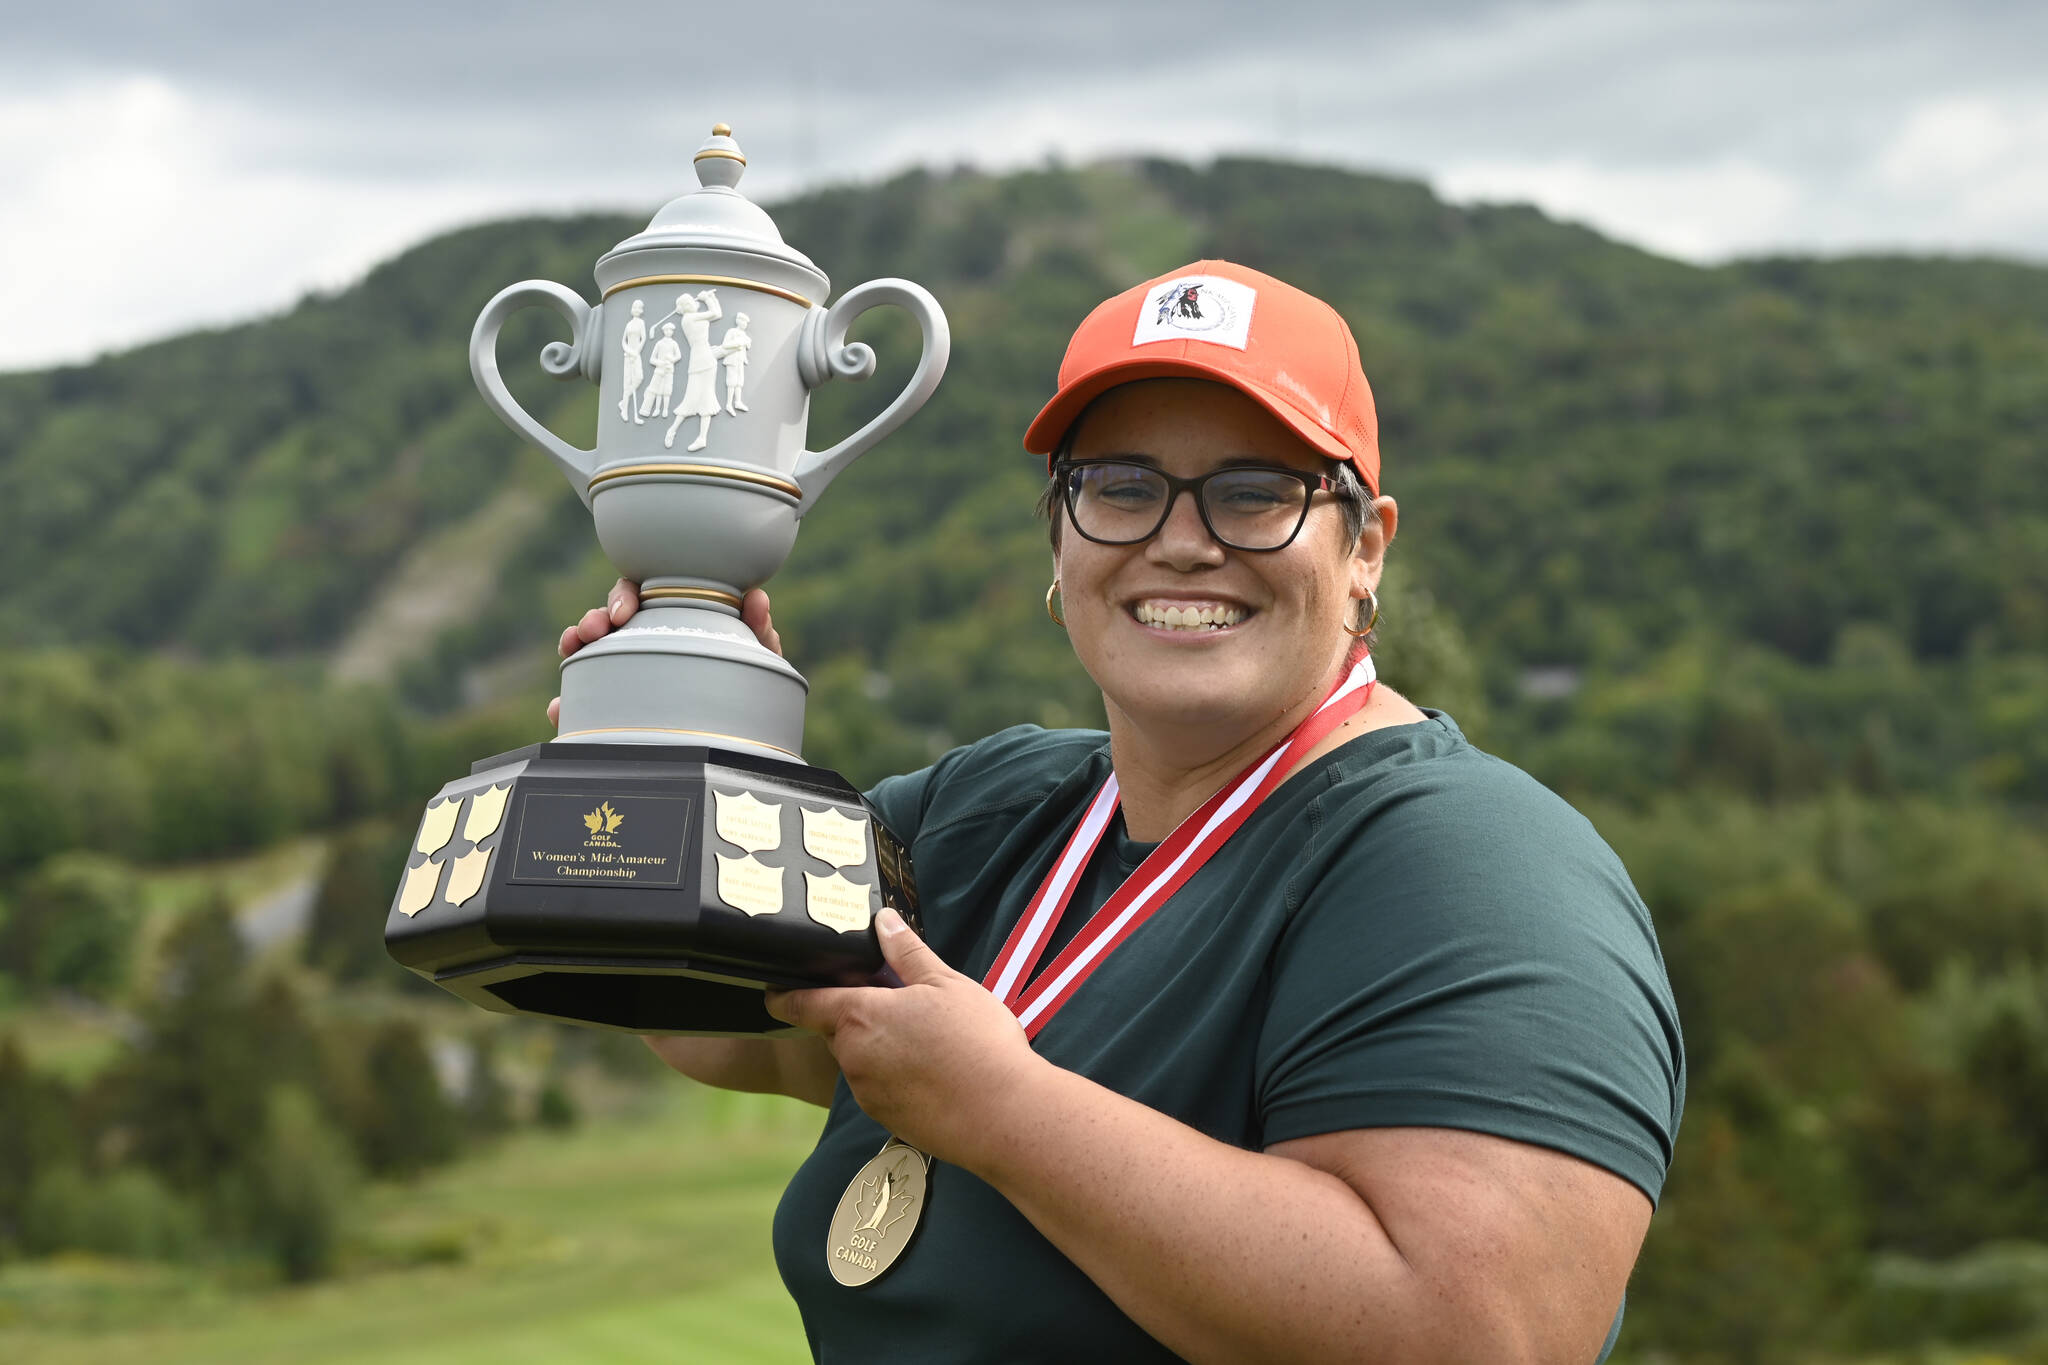 Port Alberni golfer hits second stride with national mid-Amateur title